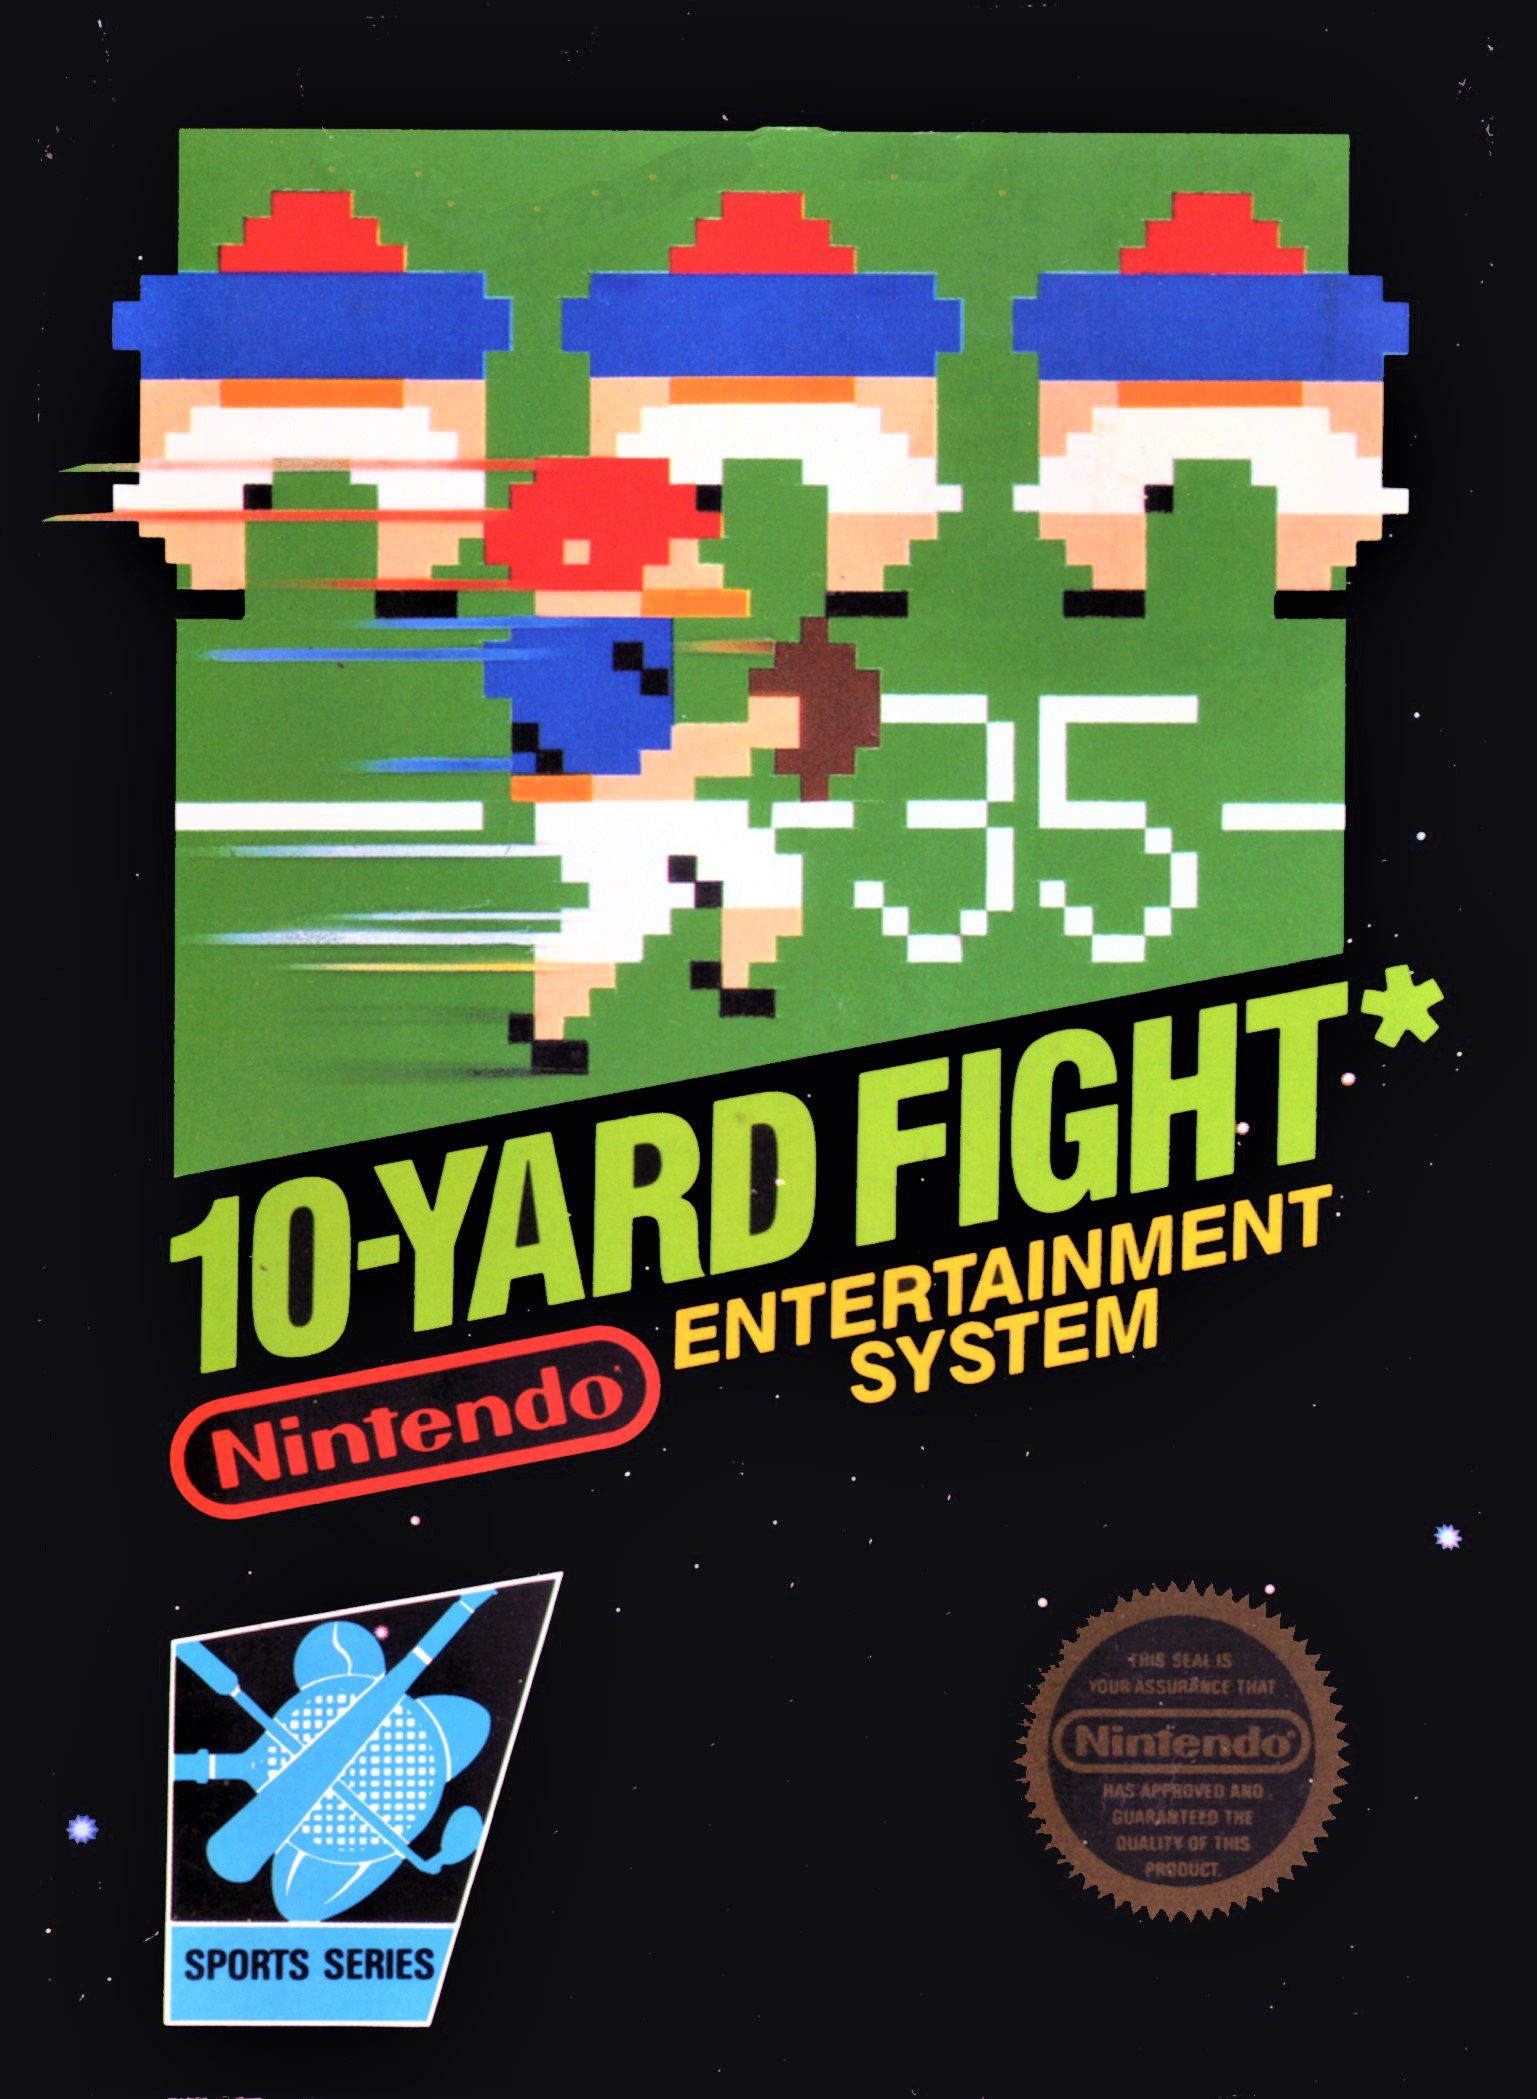 10-Yard Fight for Nintendo Entertainment System (NES)